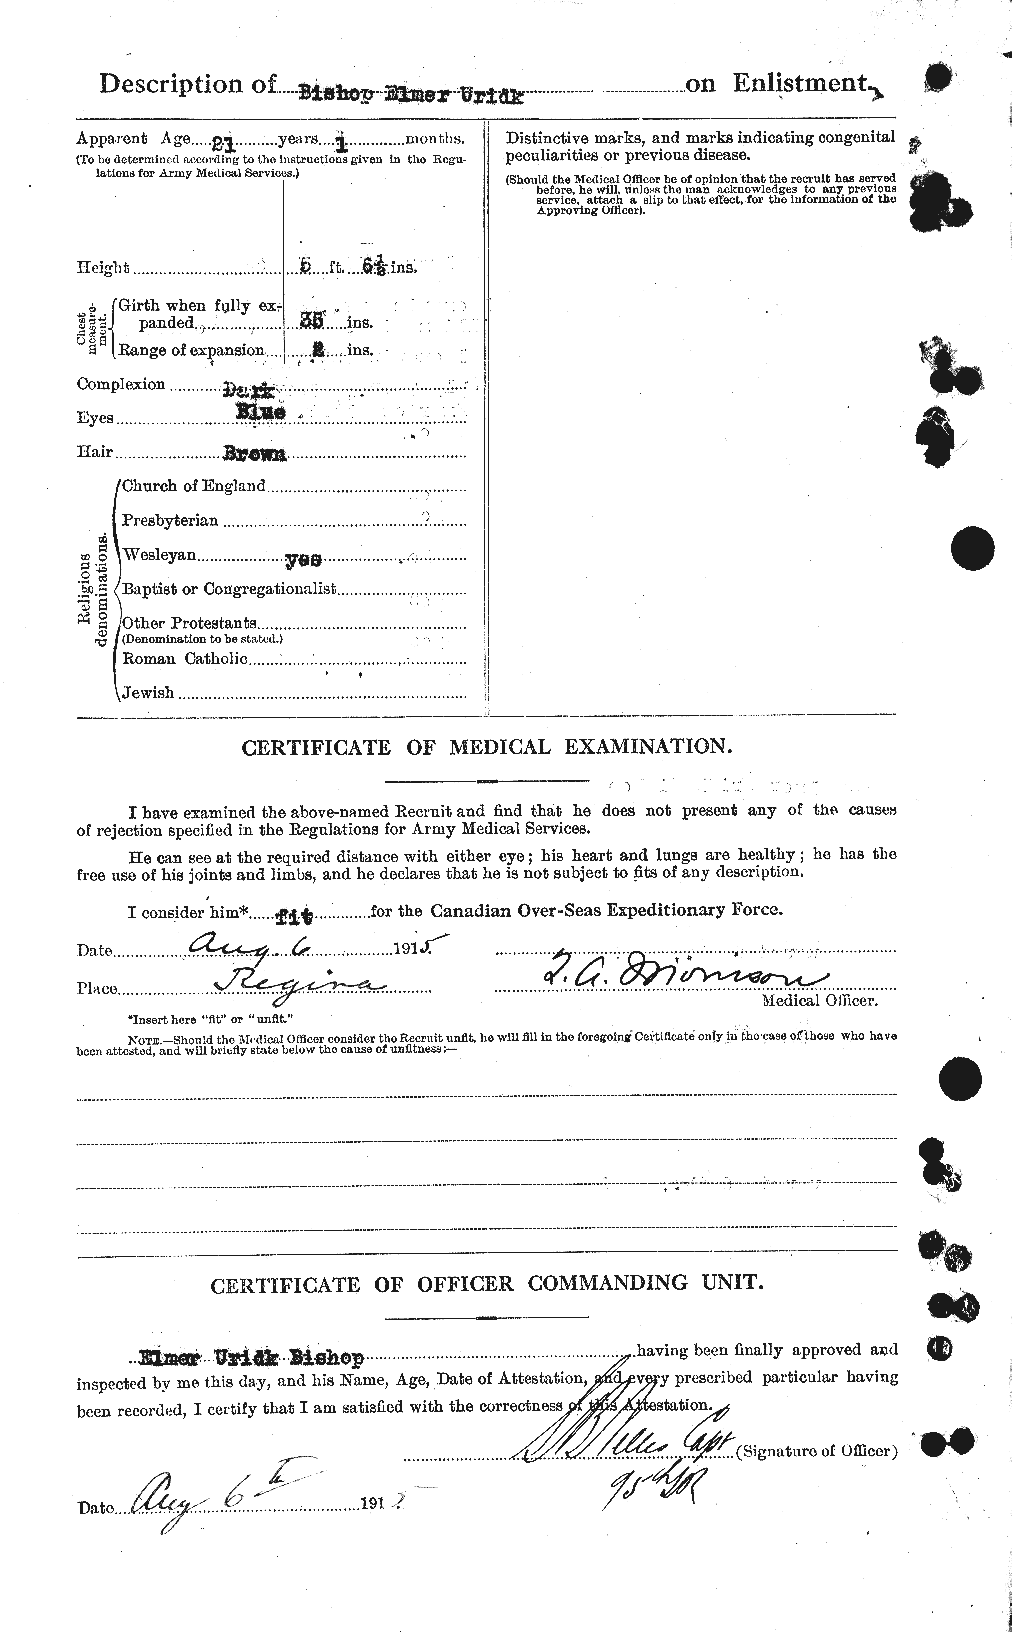 Personnel Records of the First World War - CEF 244233b